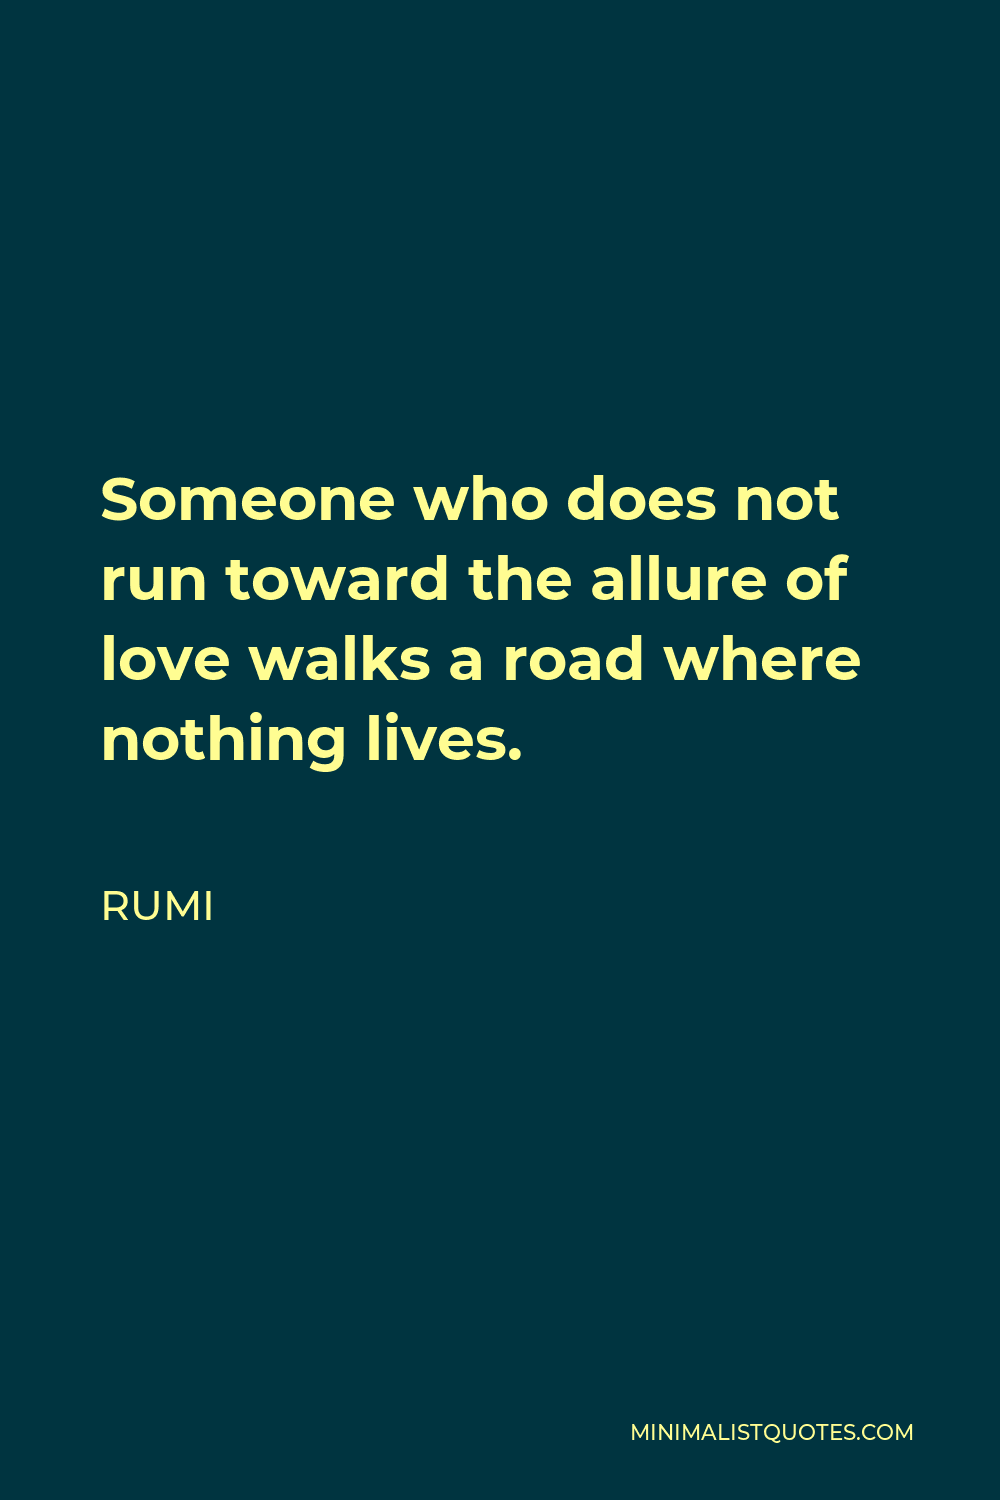 Rumi Quote - Someone who does not run toward the allure of love walks a road where nothing lives.